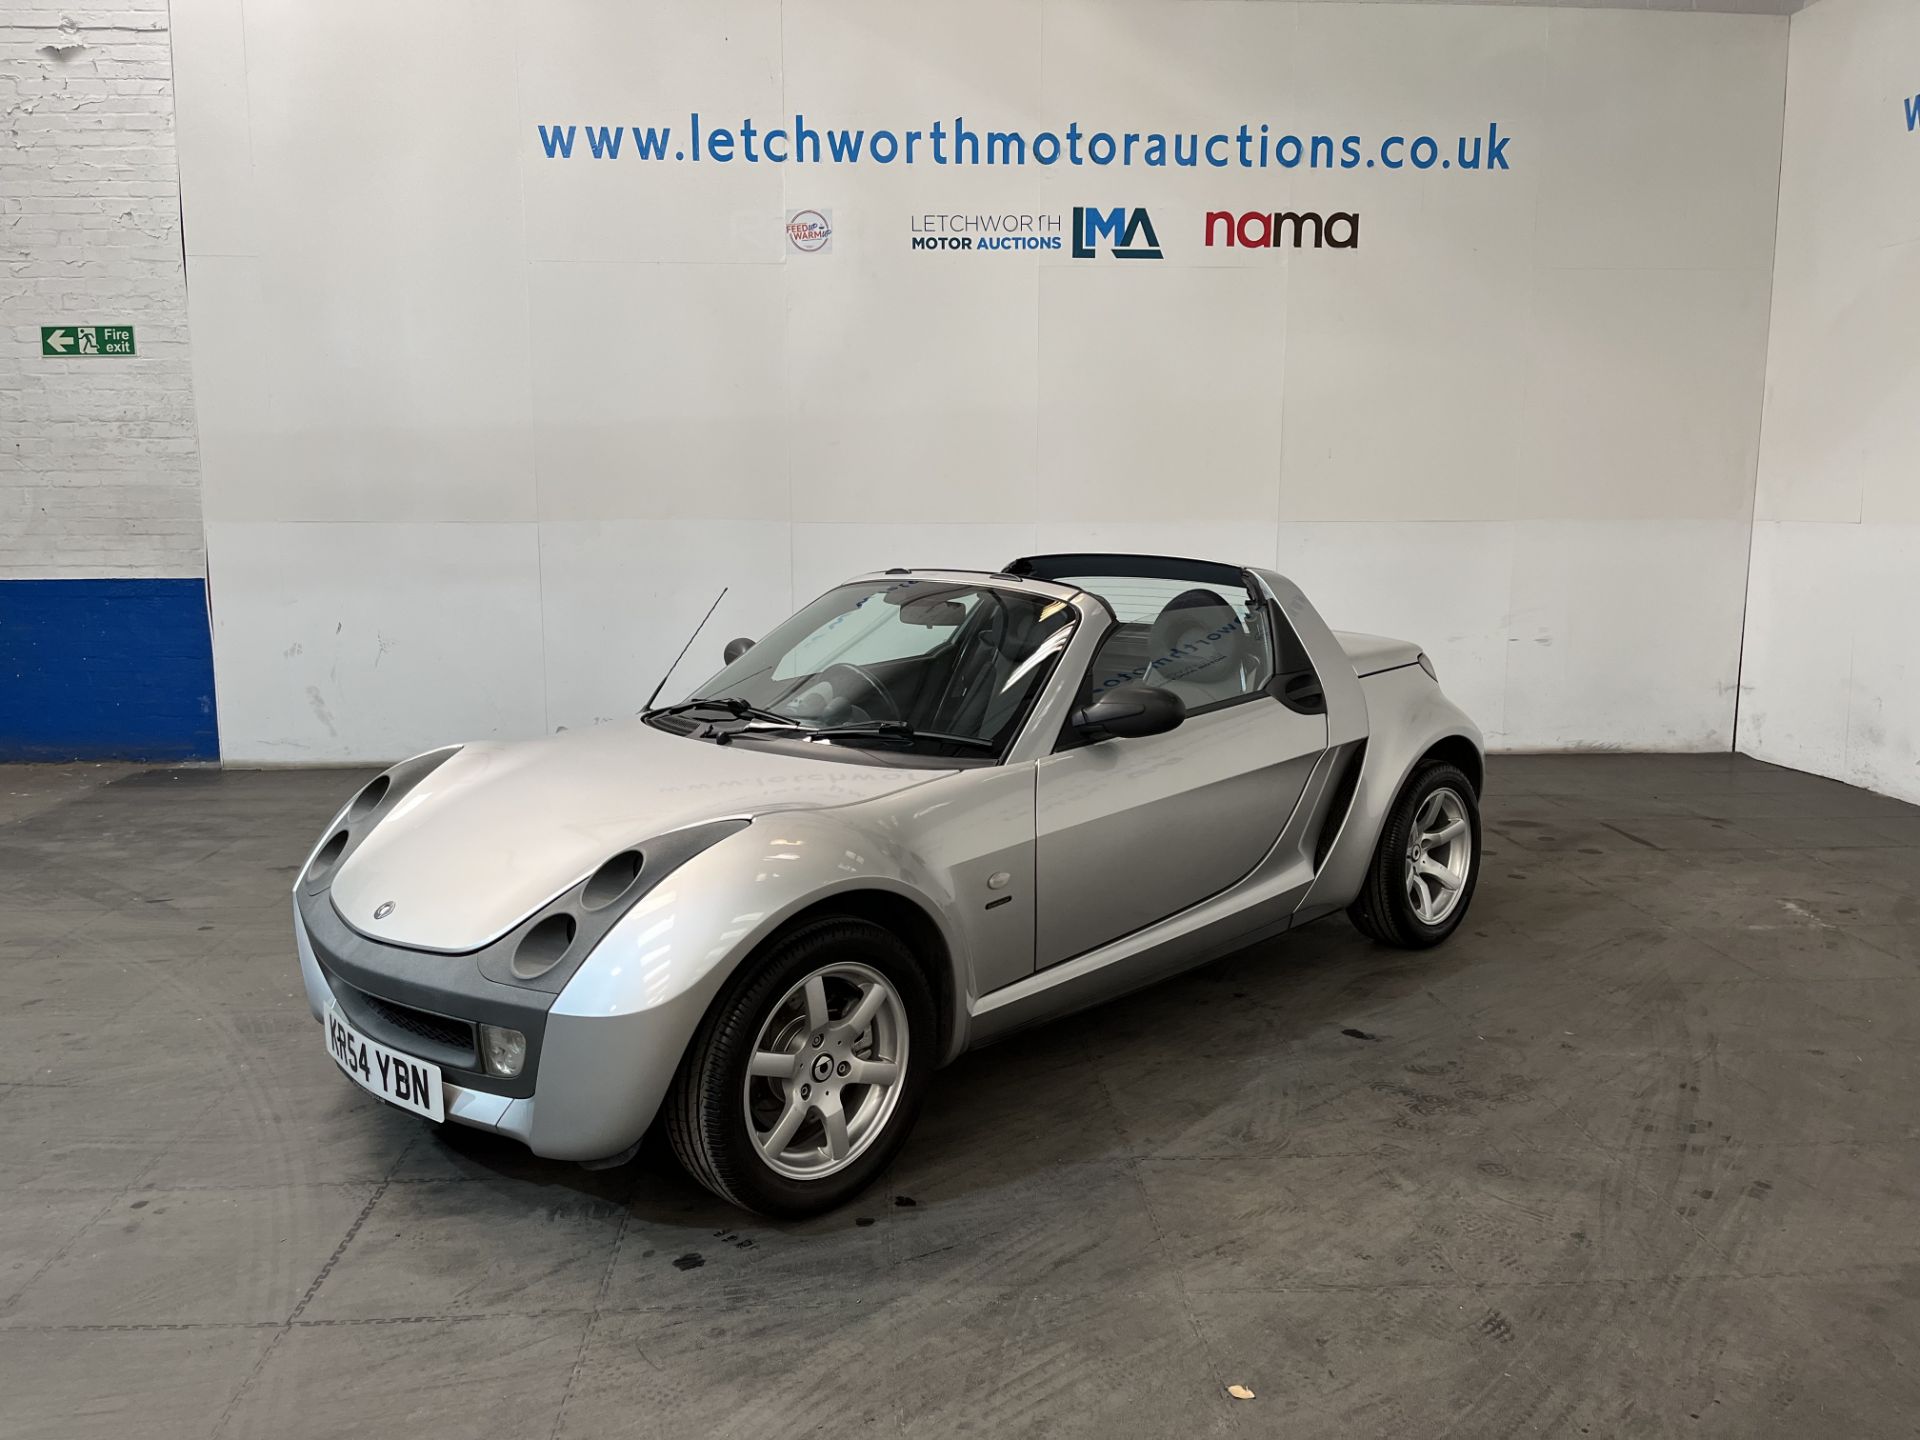 2004 Smart Roadster Speedsilver Auto - 698cc - Image 5 of 22